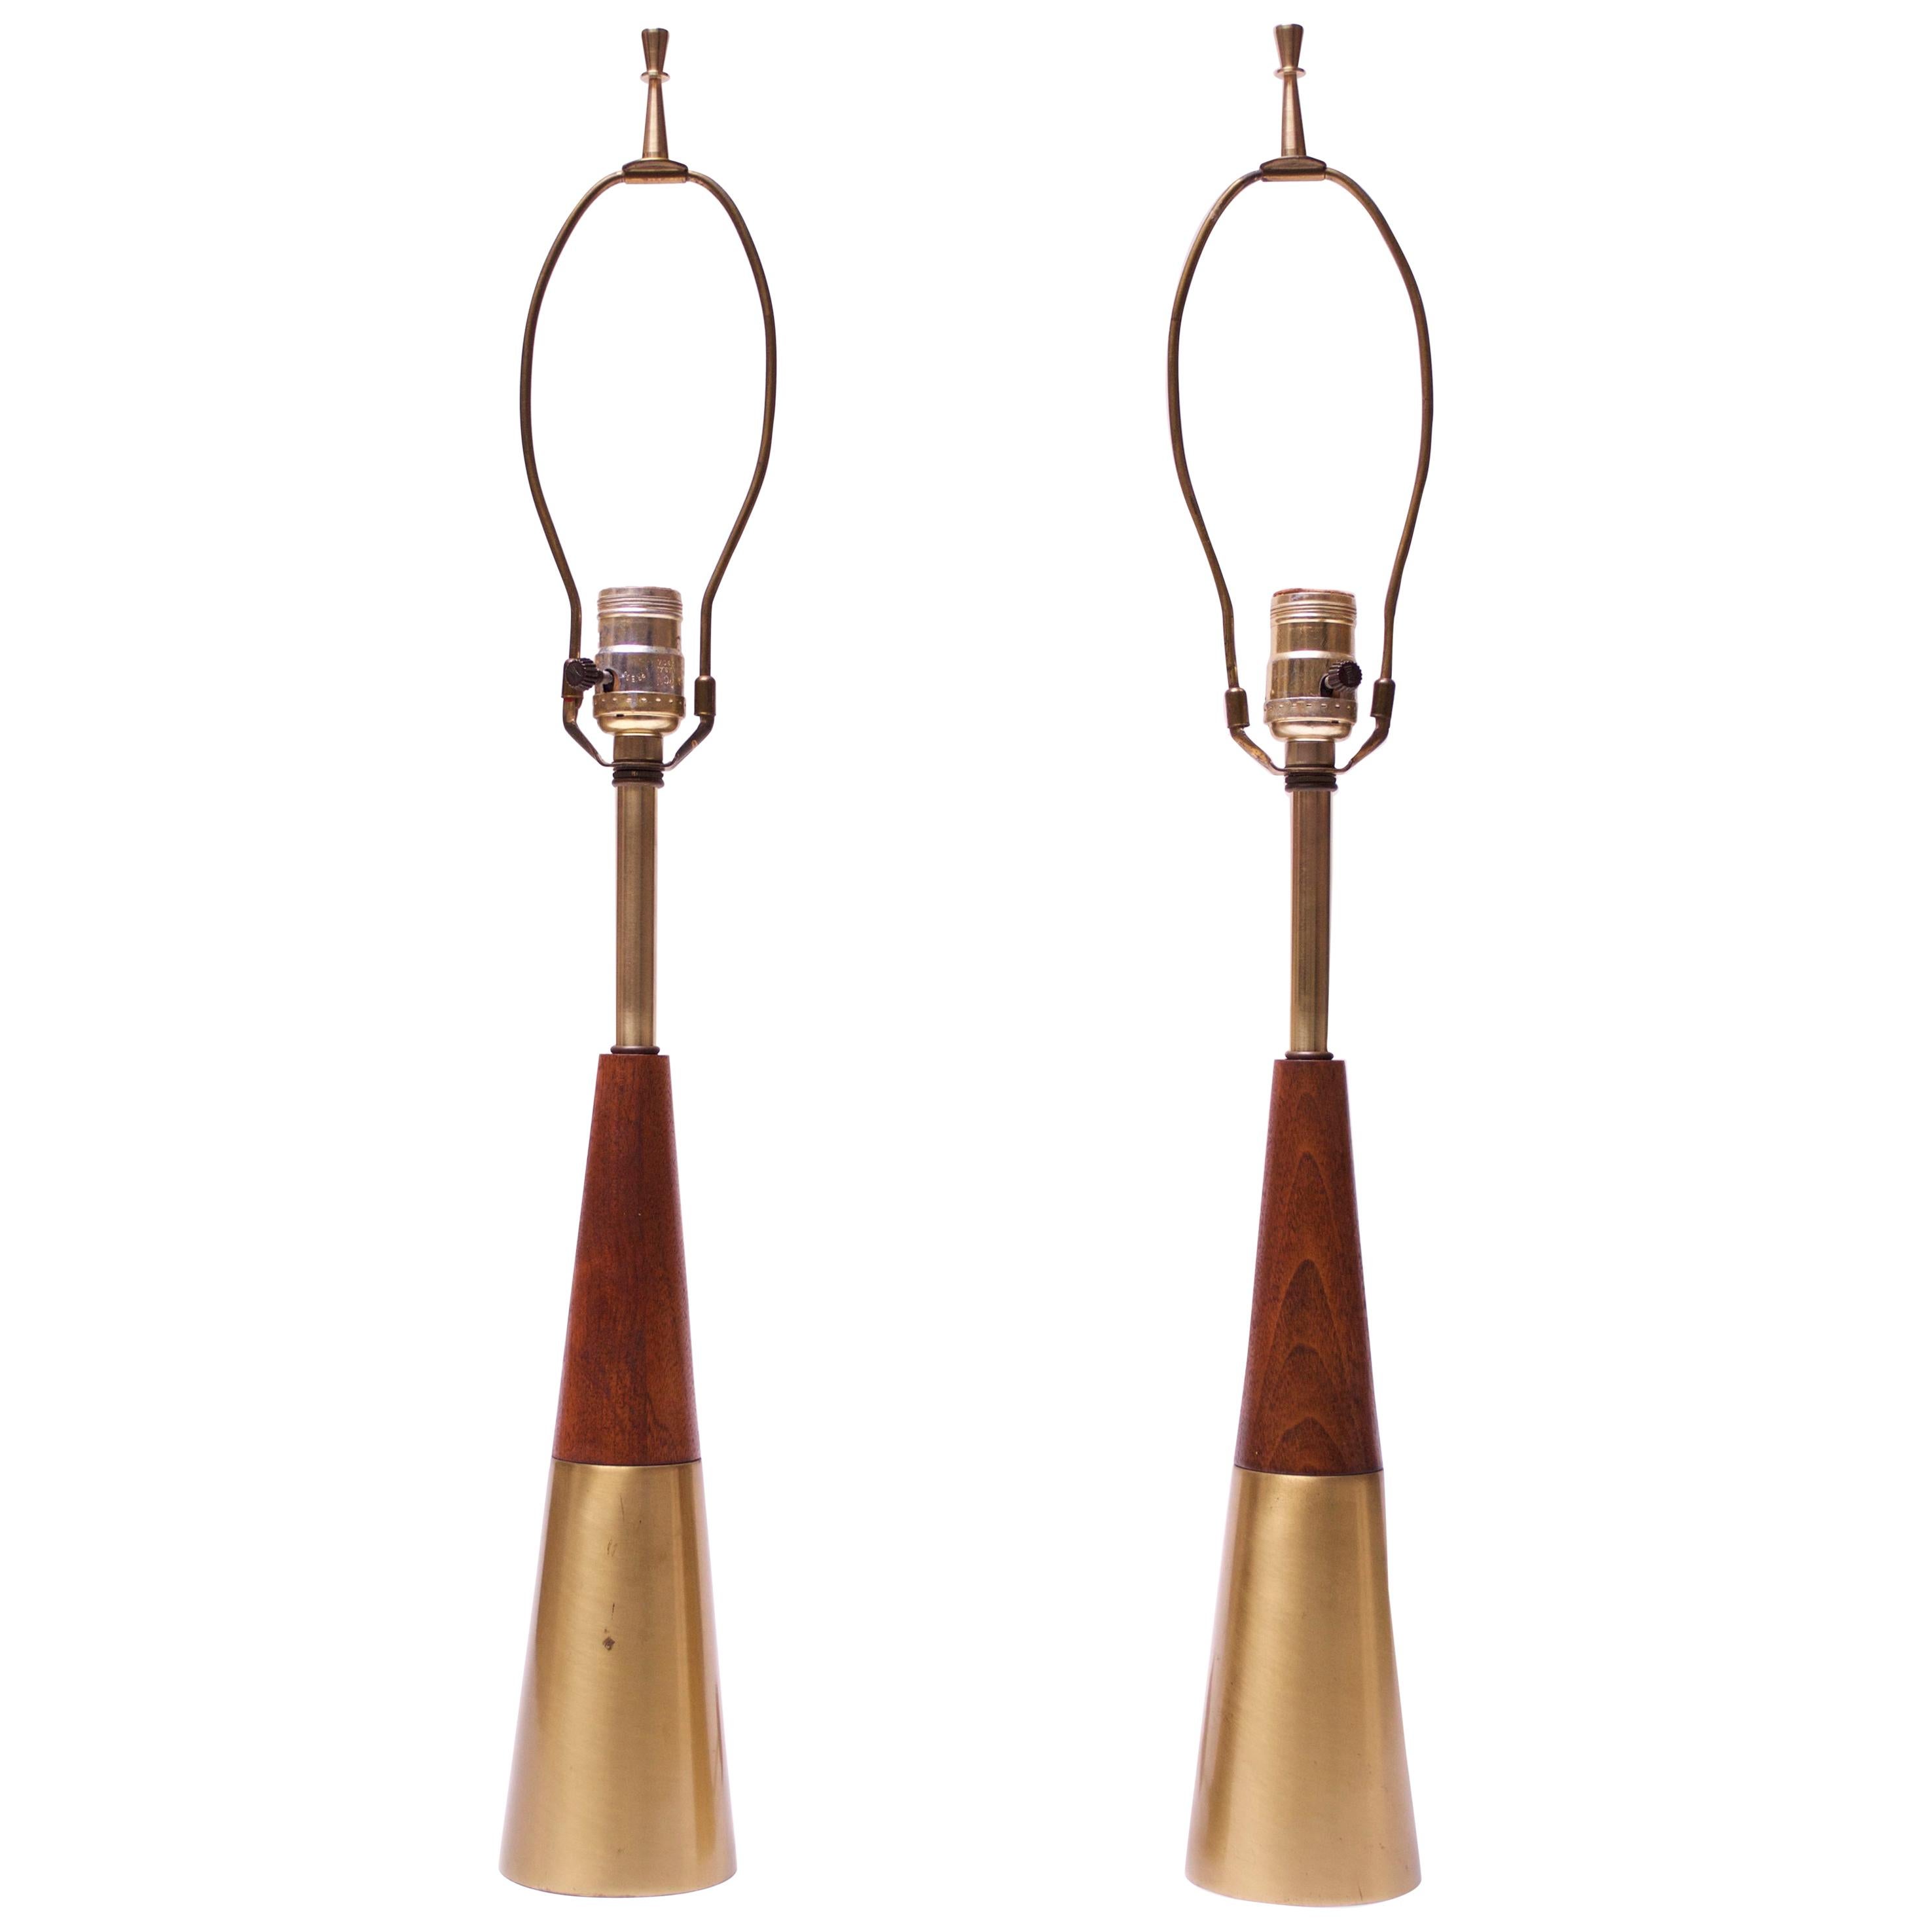 Pair of Midcentury Brass and Walnut Table Lamps by Tony Paul for Westwood